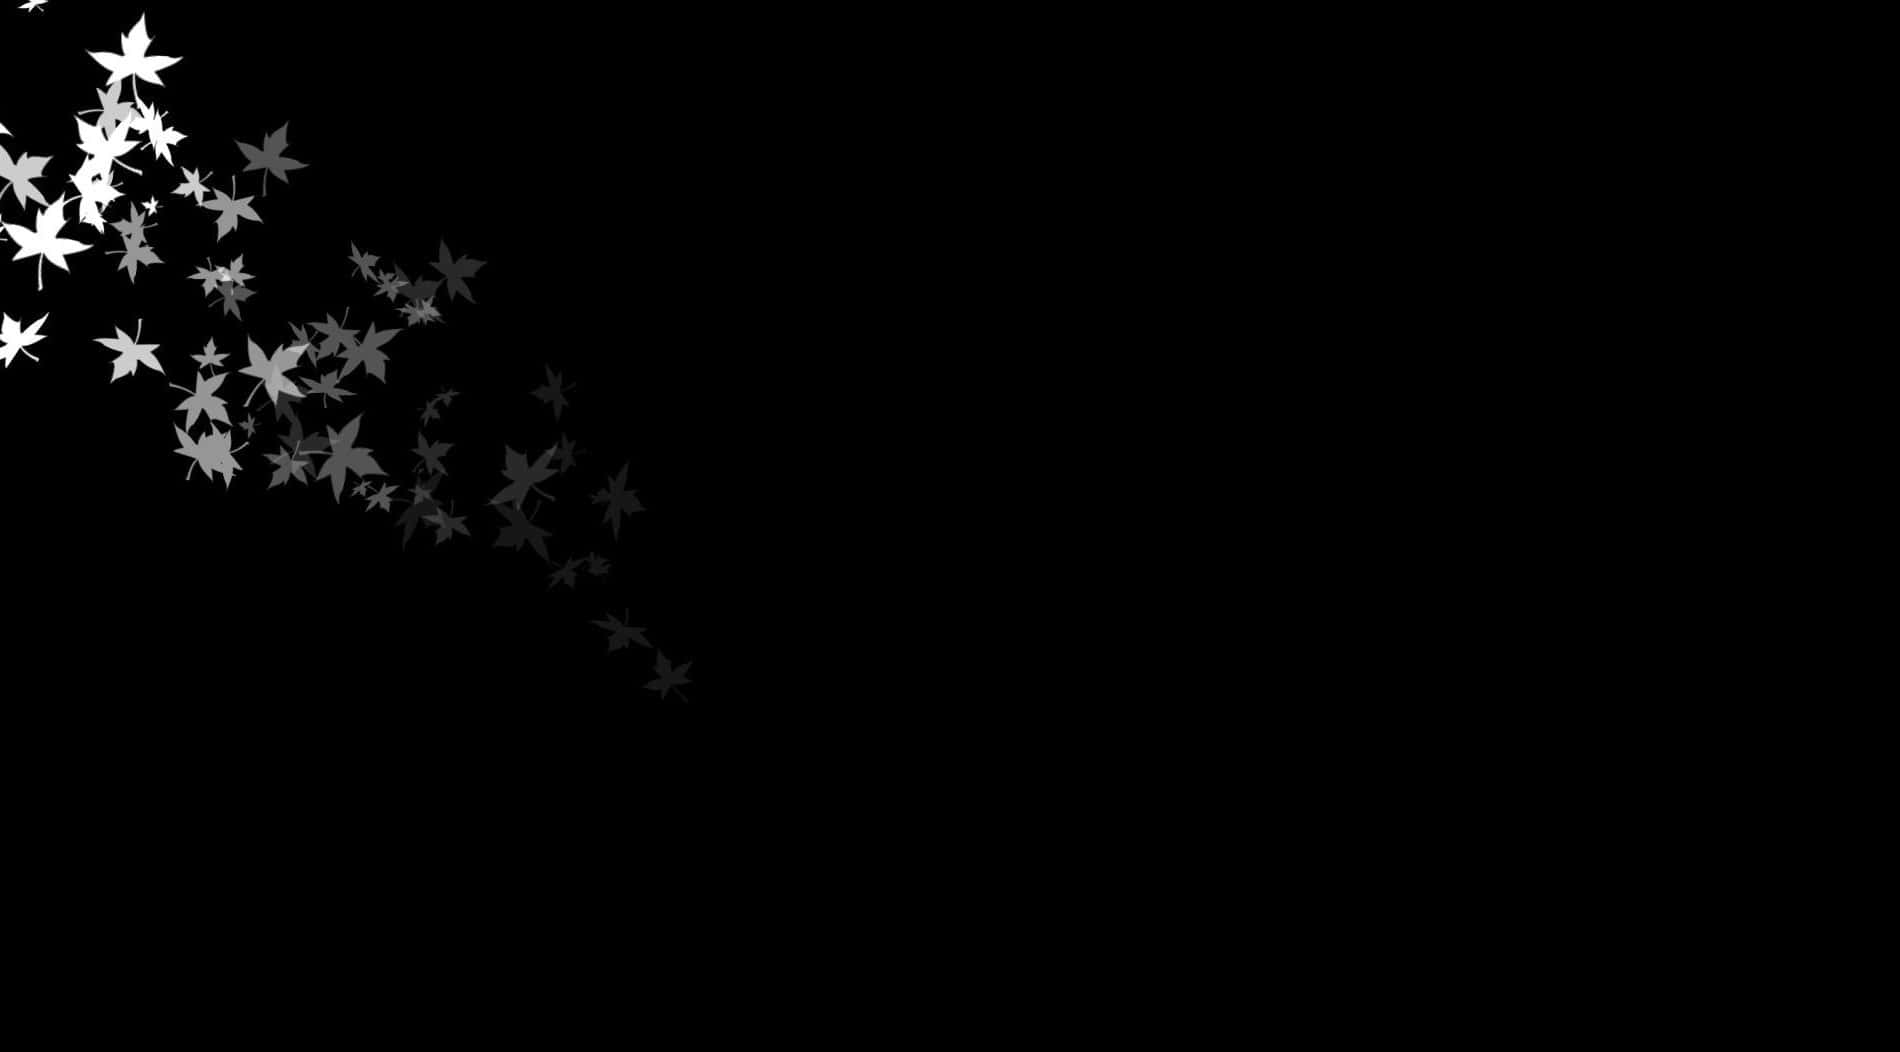 A Black Background With Stars Flying In The Air